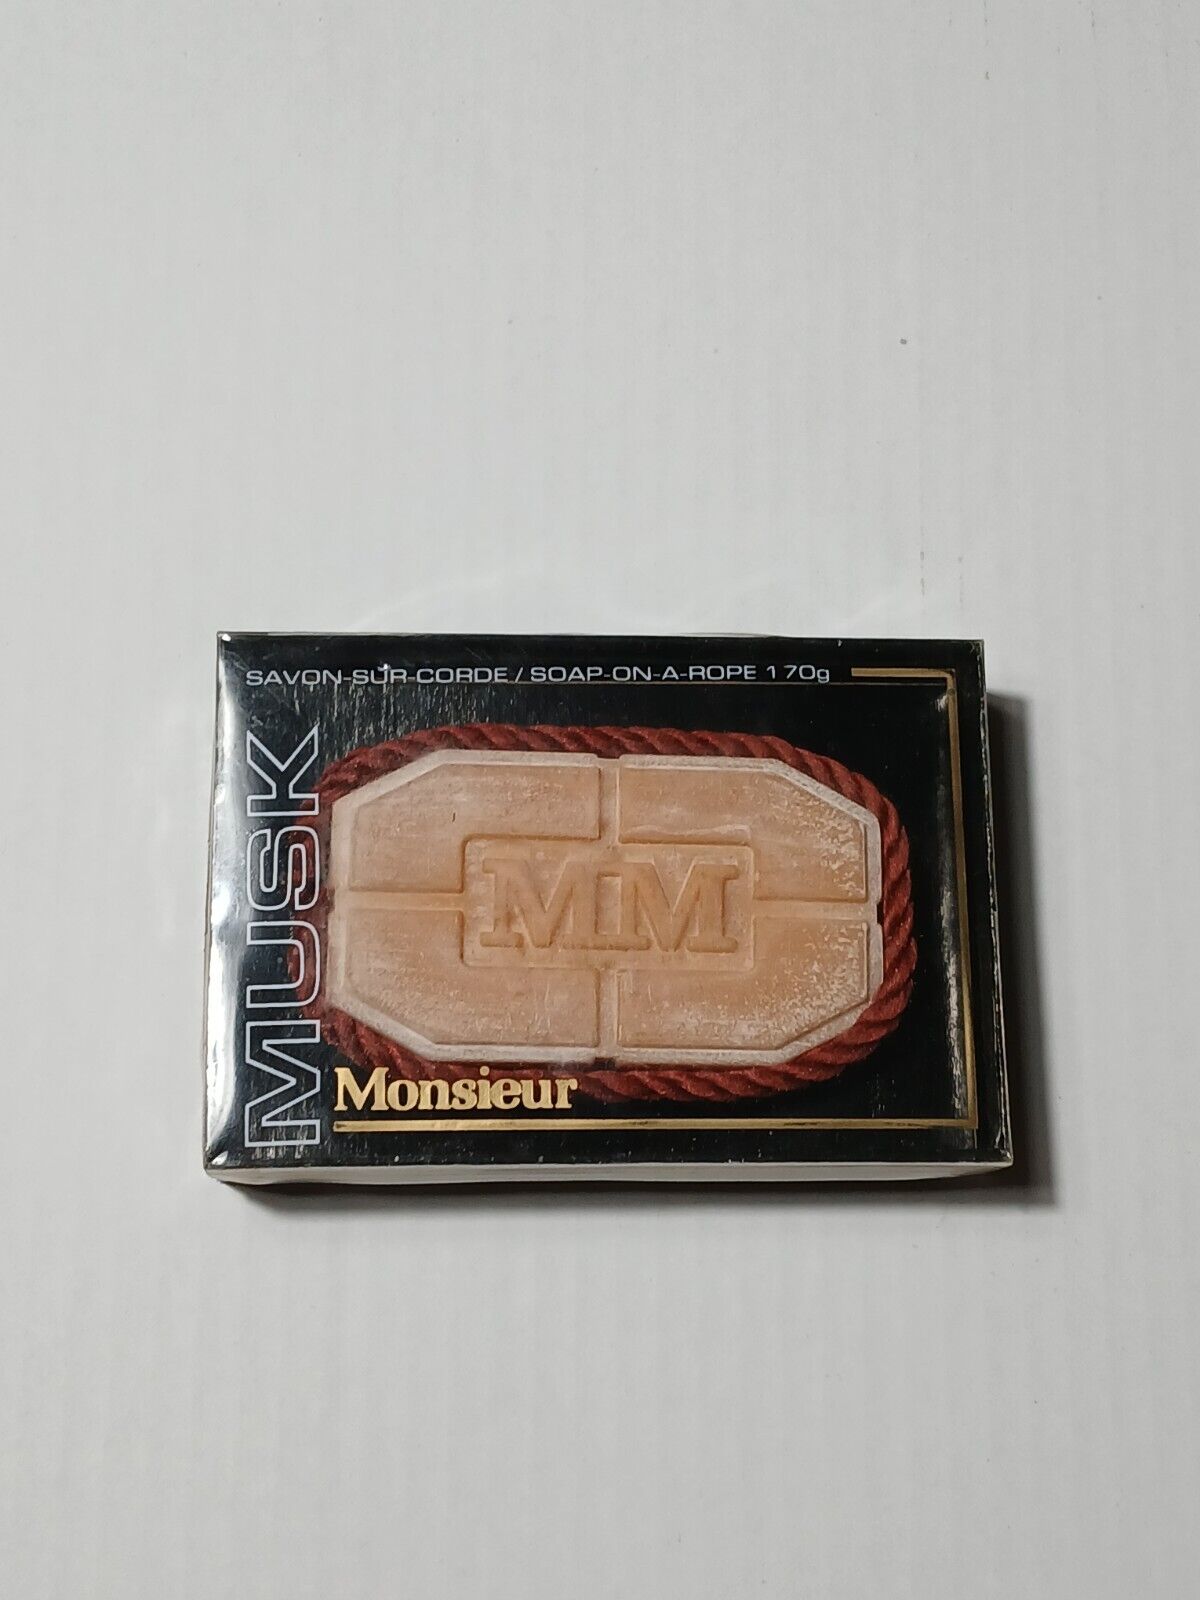 RARE Vintage Monsieur Musk Soap-on-a-Rope, LAVAL H7S 2B4 NOS 80s D2